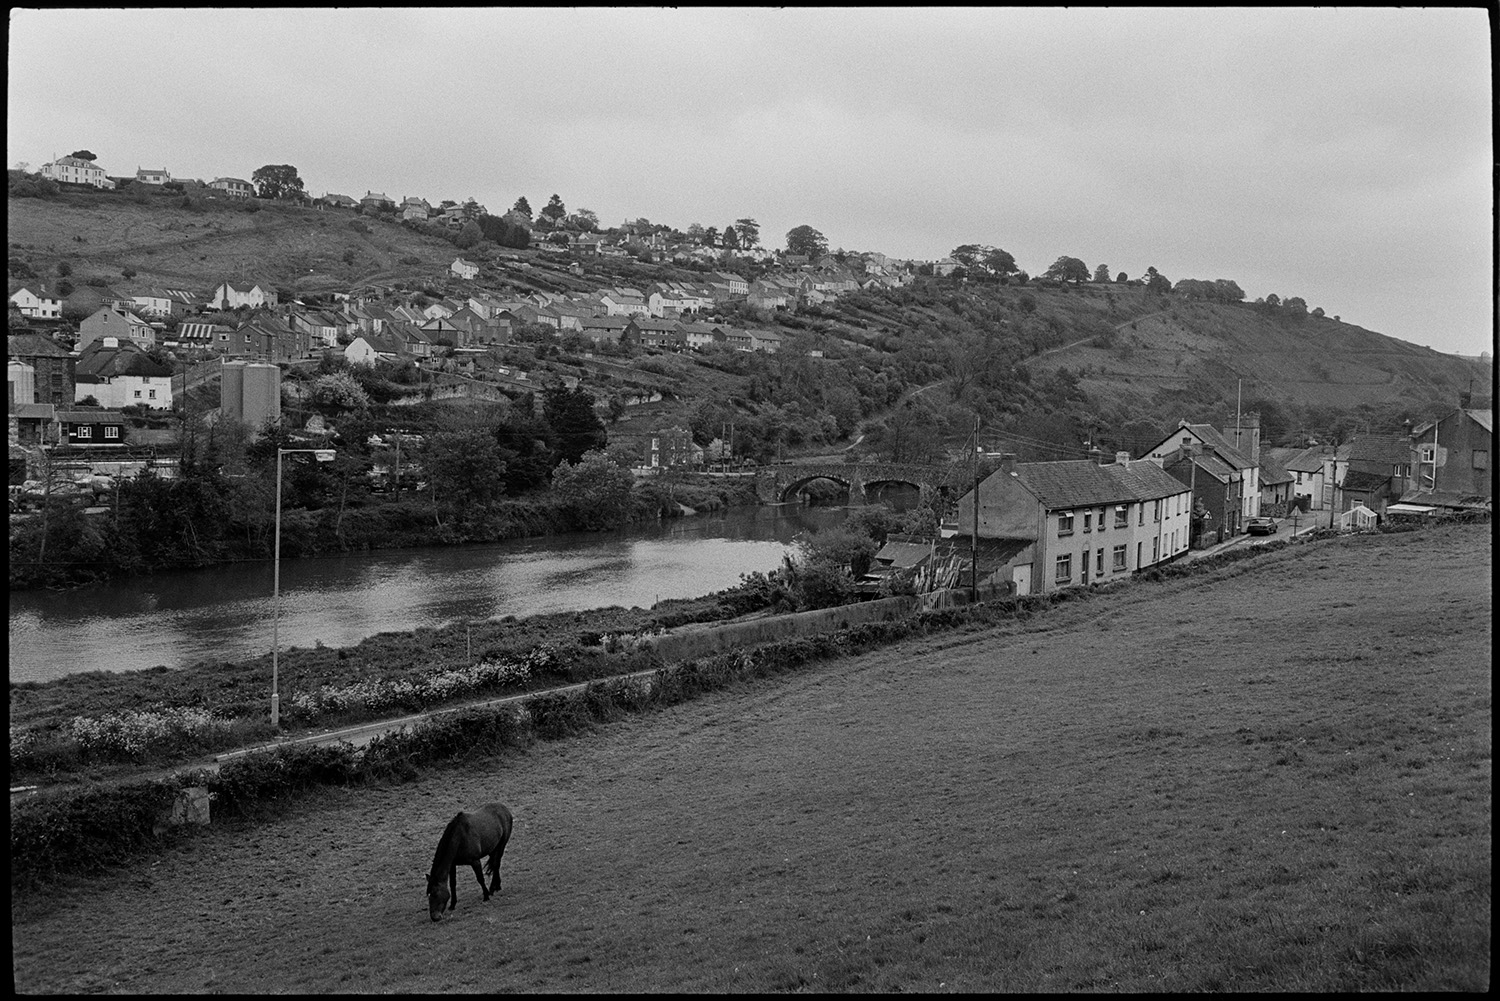 Scenes around town, comparison with old photos, railway line and station, lorries and cars, river.
[Scene from the bottom of a field looking towards a hillside with houses in Torrington.  A horse is grazing in a field in the foreground beside the River Torridge. A bridge can also be seen over the river.]